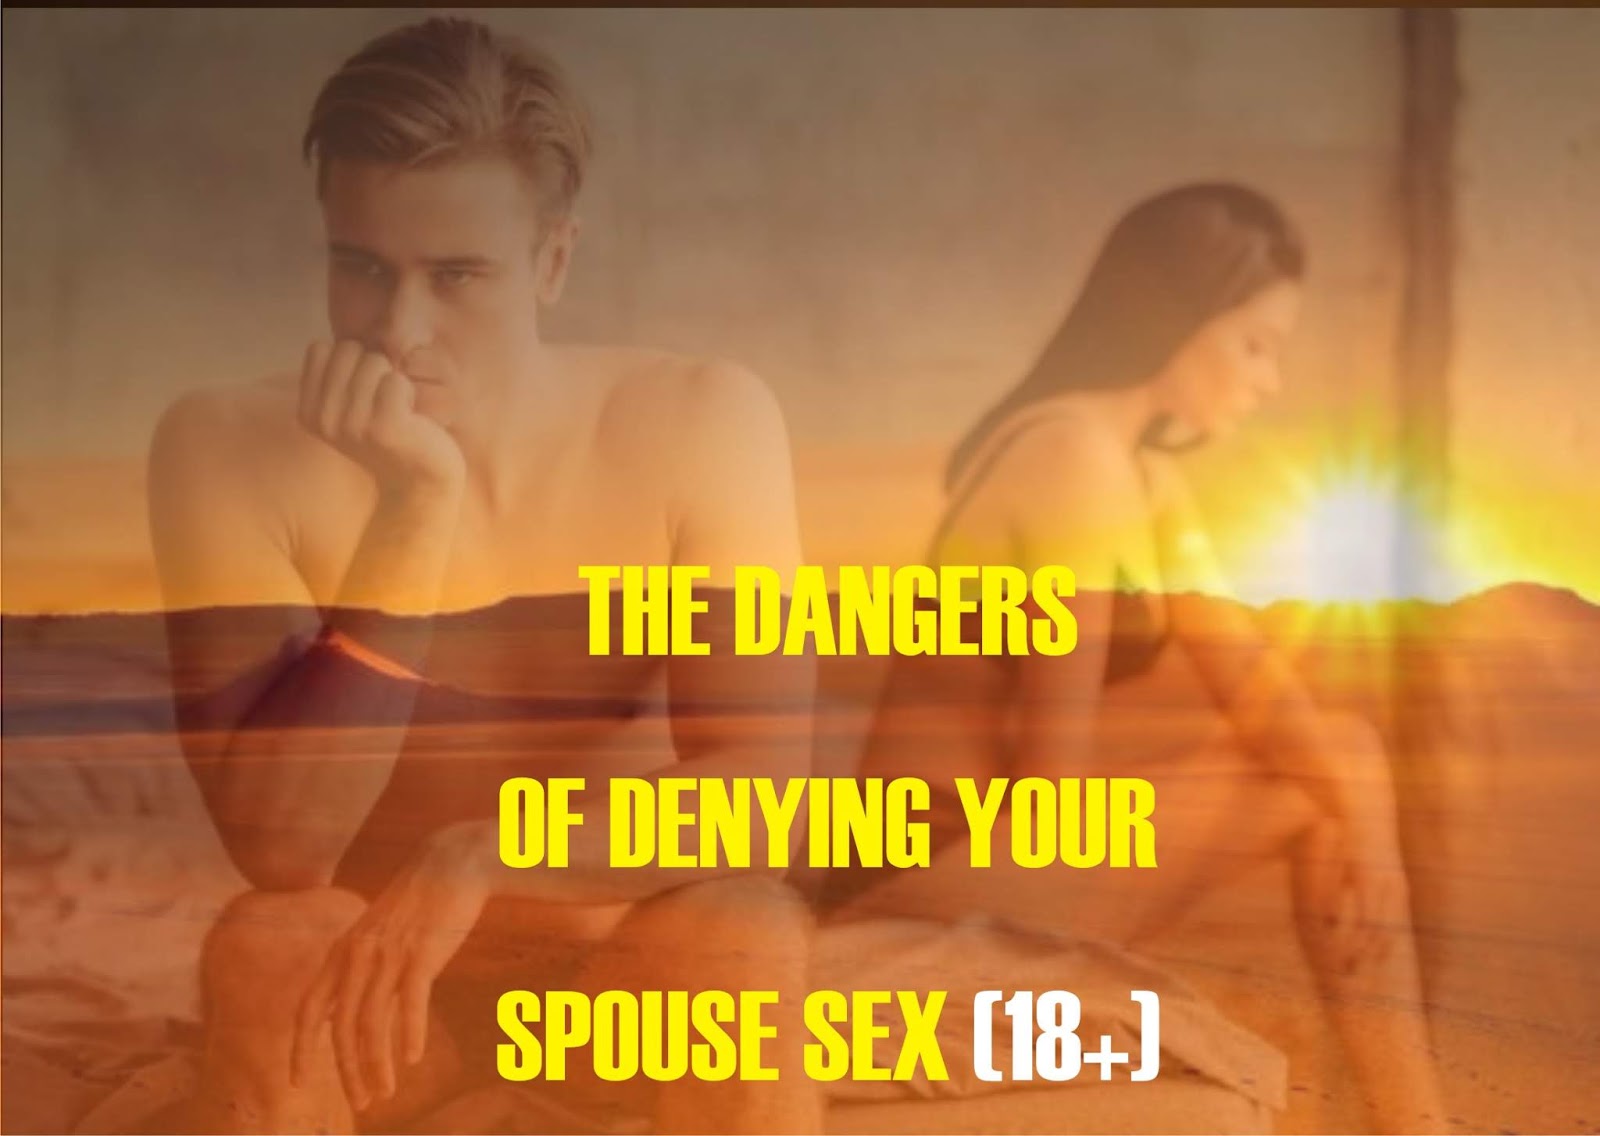 THE DANGERS OF DENYING YOUR SPOUSE SEX (18+)